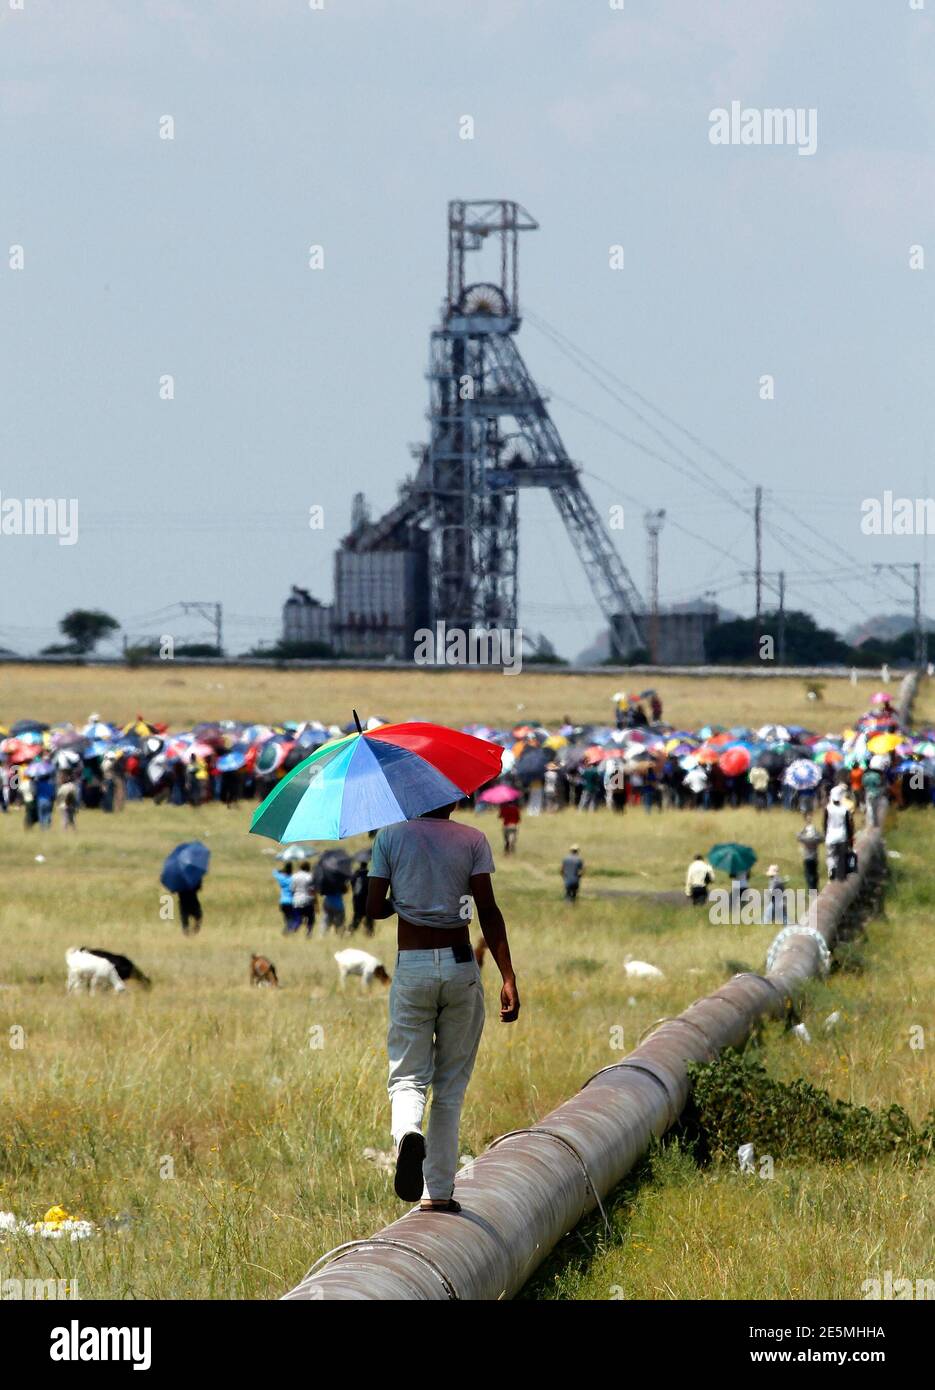 A man walks on a steel pipe to join other striking miners gathered for a meeting outside the Impala Platinum mine in Rustenburg, 120 km (74.6 miles) northwest of Johannesburg February 21, 2012. Impala Platinum, the world's second largest platinum producer, said on Monday that a violent labour dispute at its flagship Rustenburg operations has cost it 80,000 ounces in lost production to date. The stoppage, now in its fifth week, is costing 20,000 ounces a week but the company said its capital projects remained "largely unaffected" by the unfolding drama around the mine, where violence has claime Stock Photo